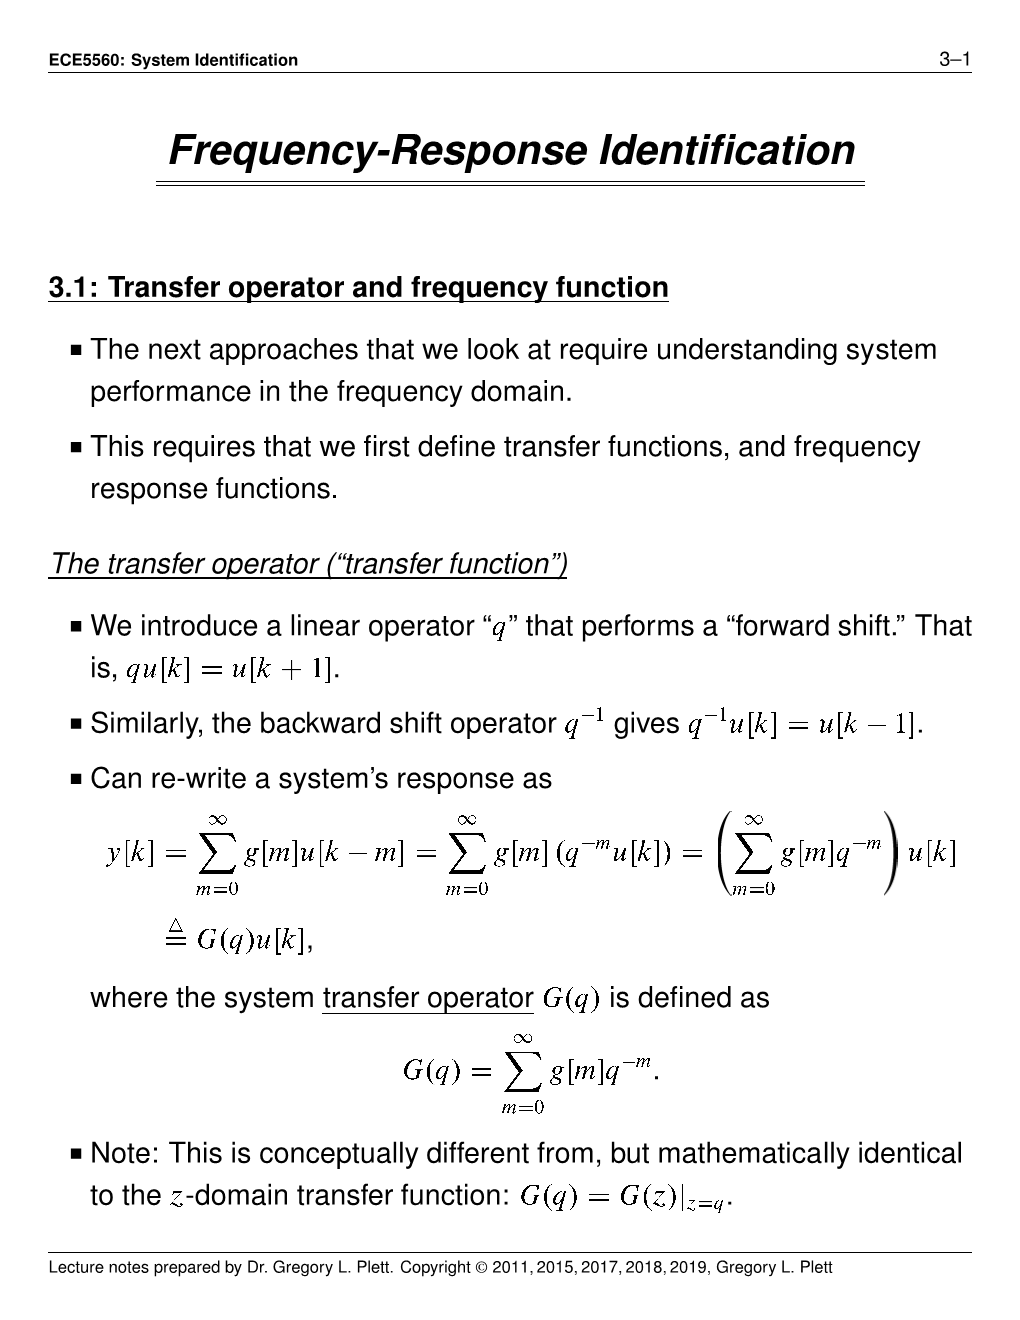 Frequency-Response Identification